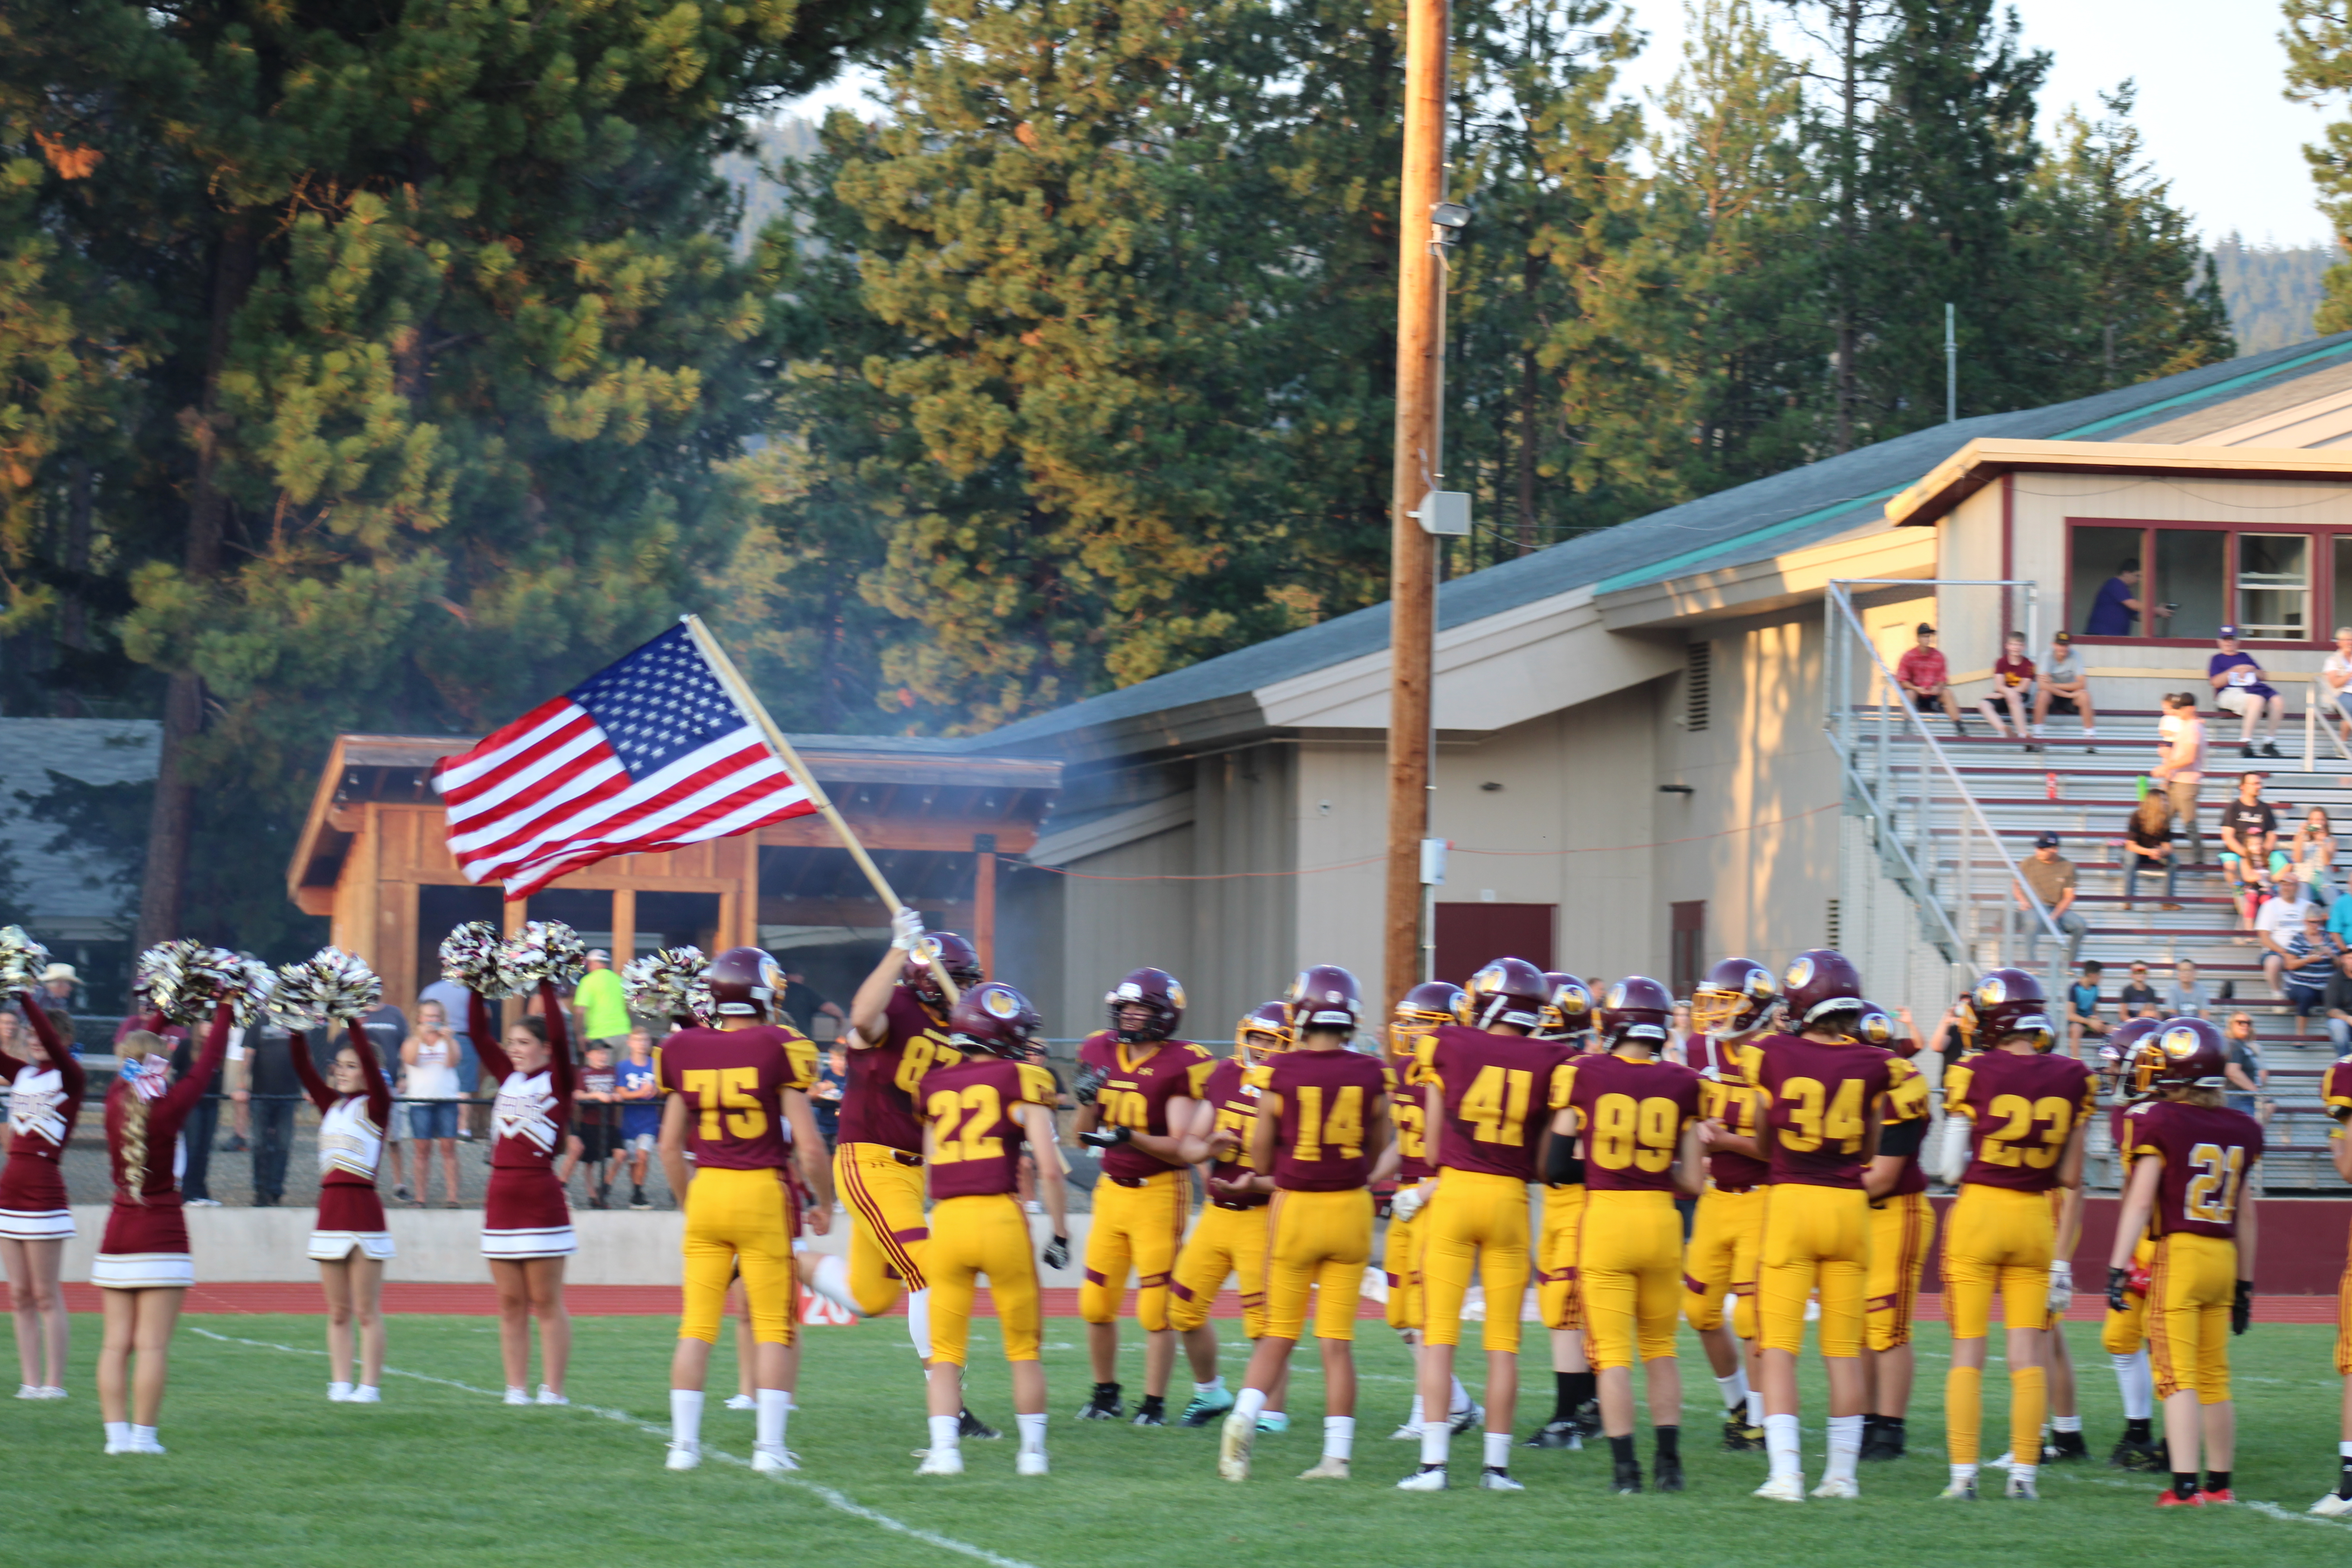 Football players taking the field for the first game carrying an American flag.